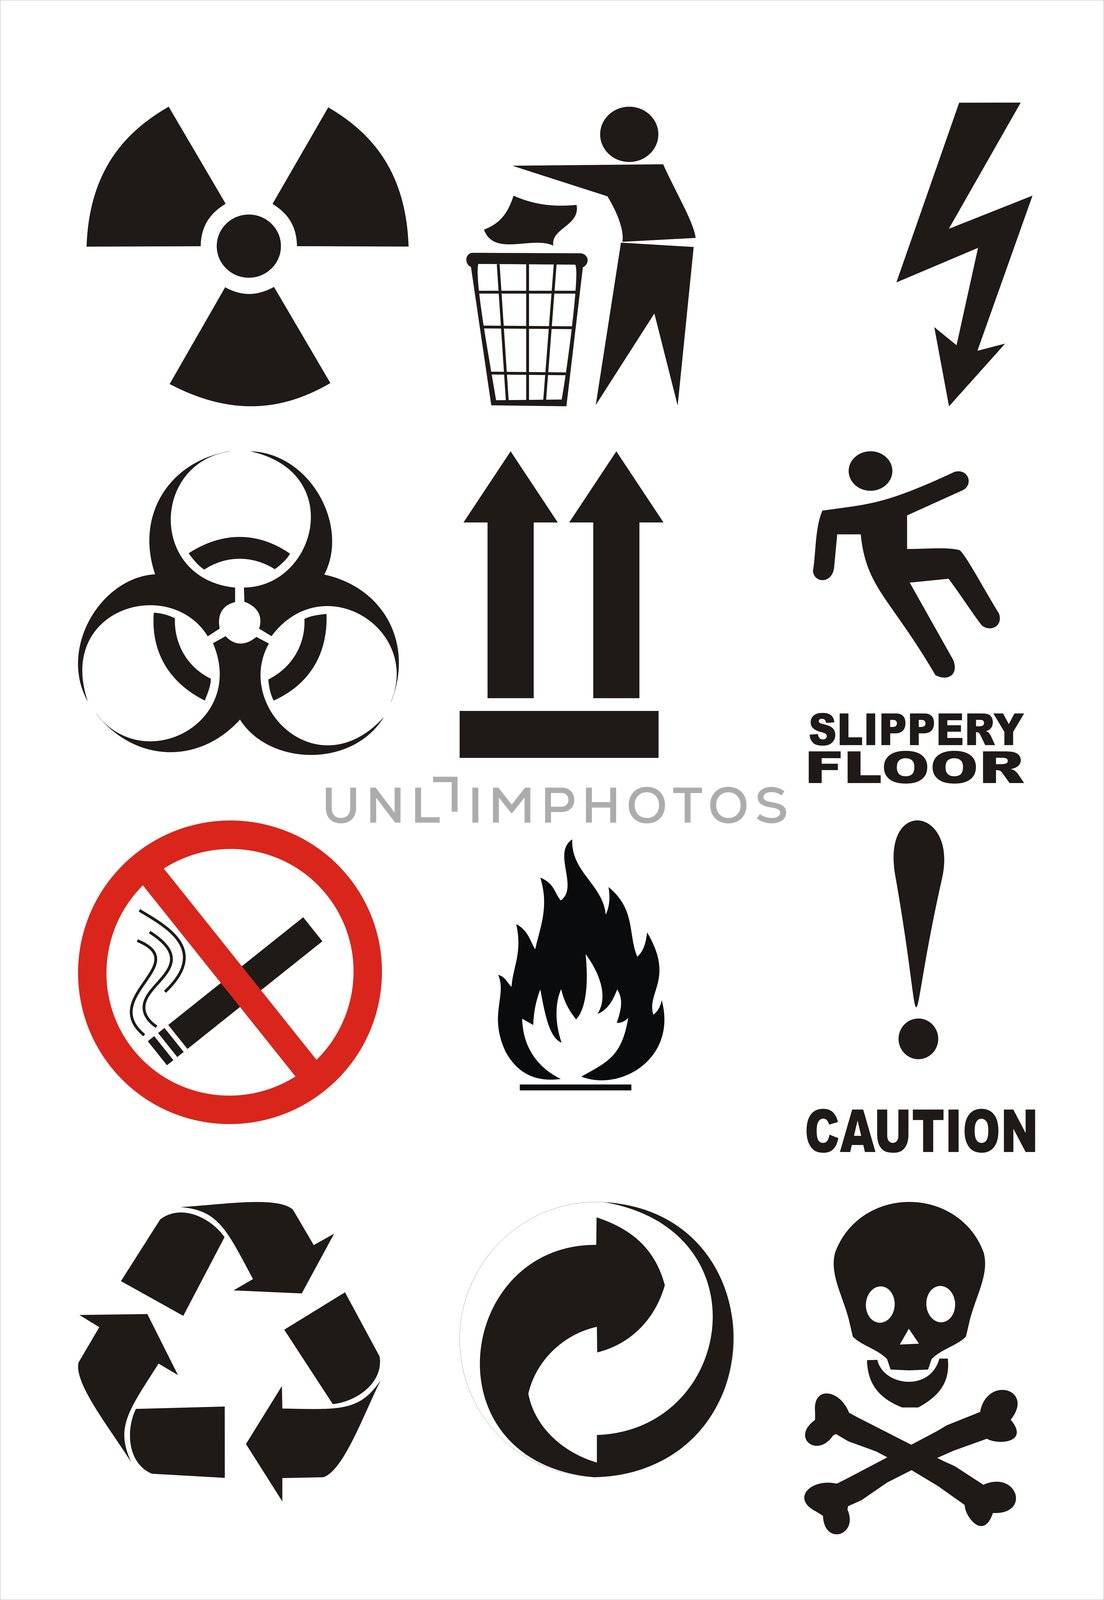 Useful Warning Symbols vectorial poster image isolated